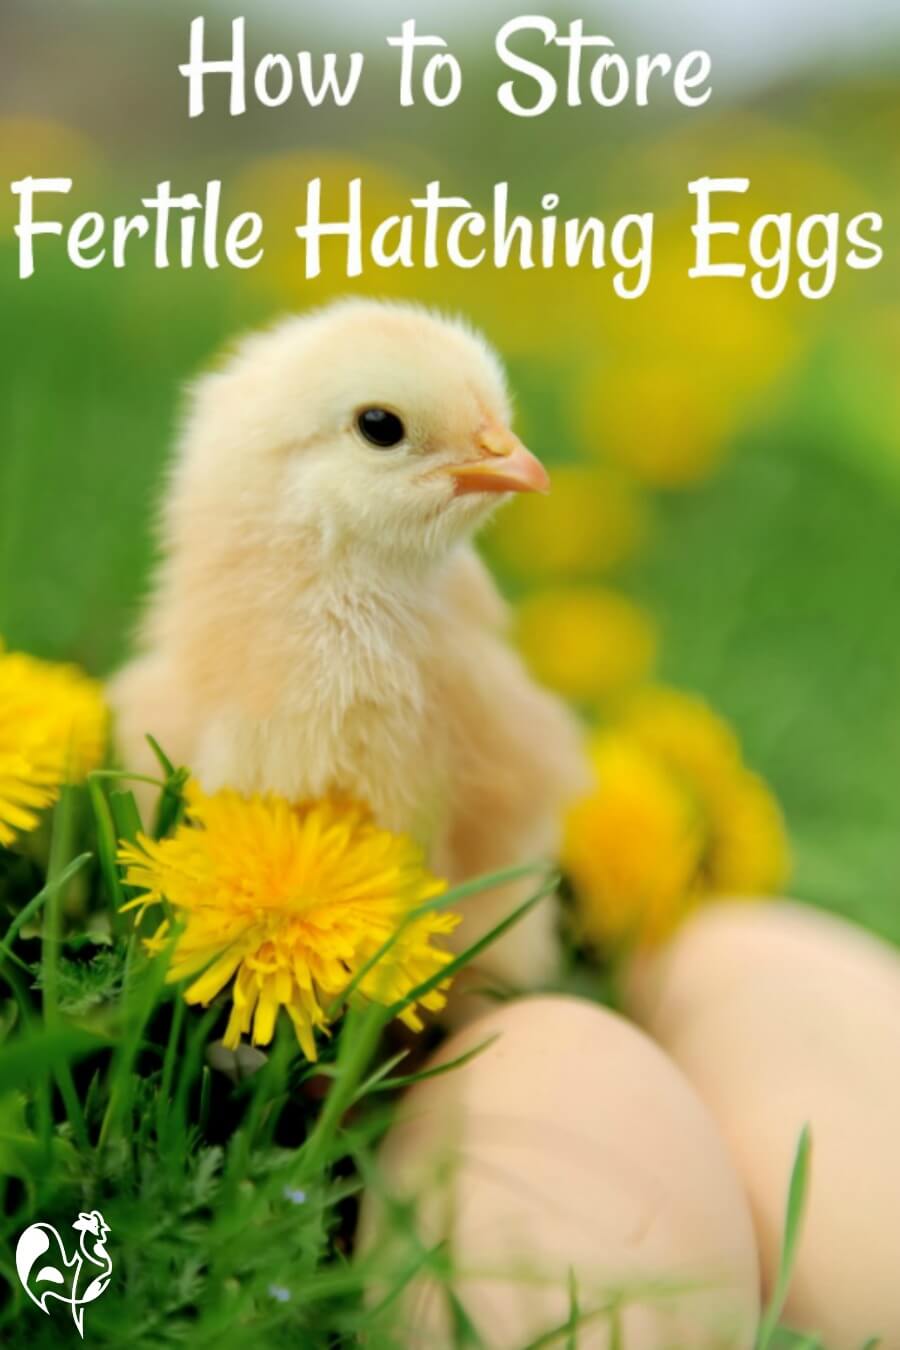 Storing fertile chicken eggs: 5 steps to a successful hatch.